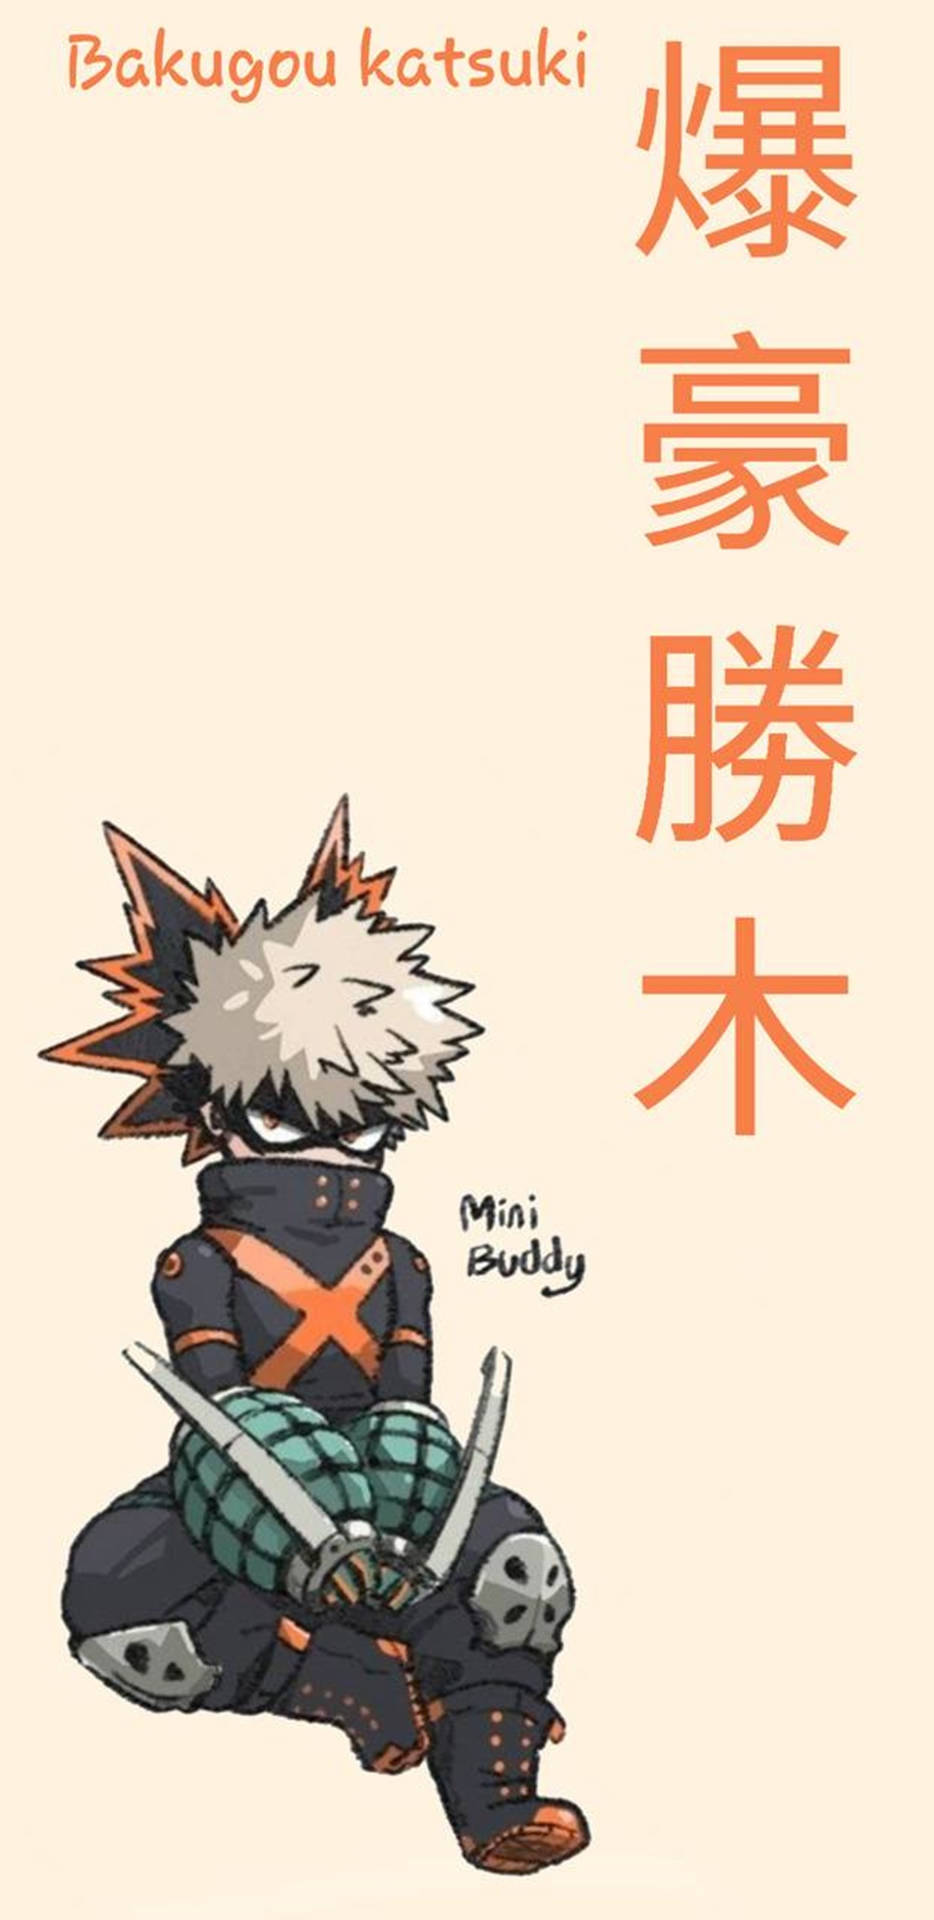 Bakugou - Living Life With A Smile. Background